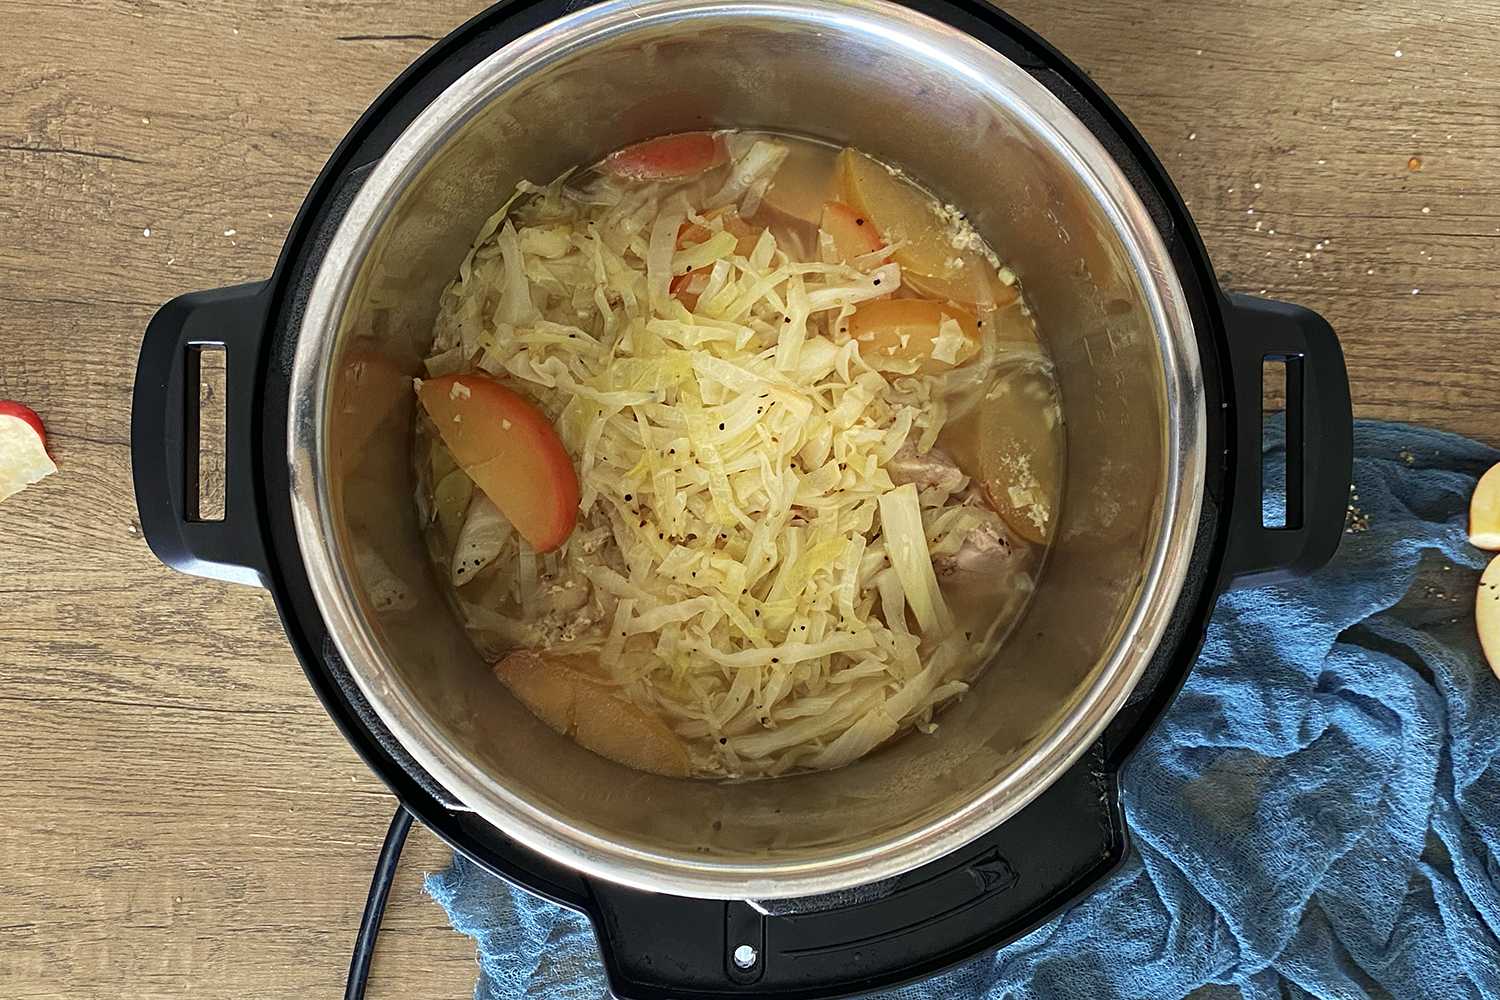 How Do I Cook Sauerkraut And Pork In An Electric Pressure Cooker